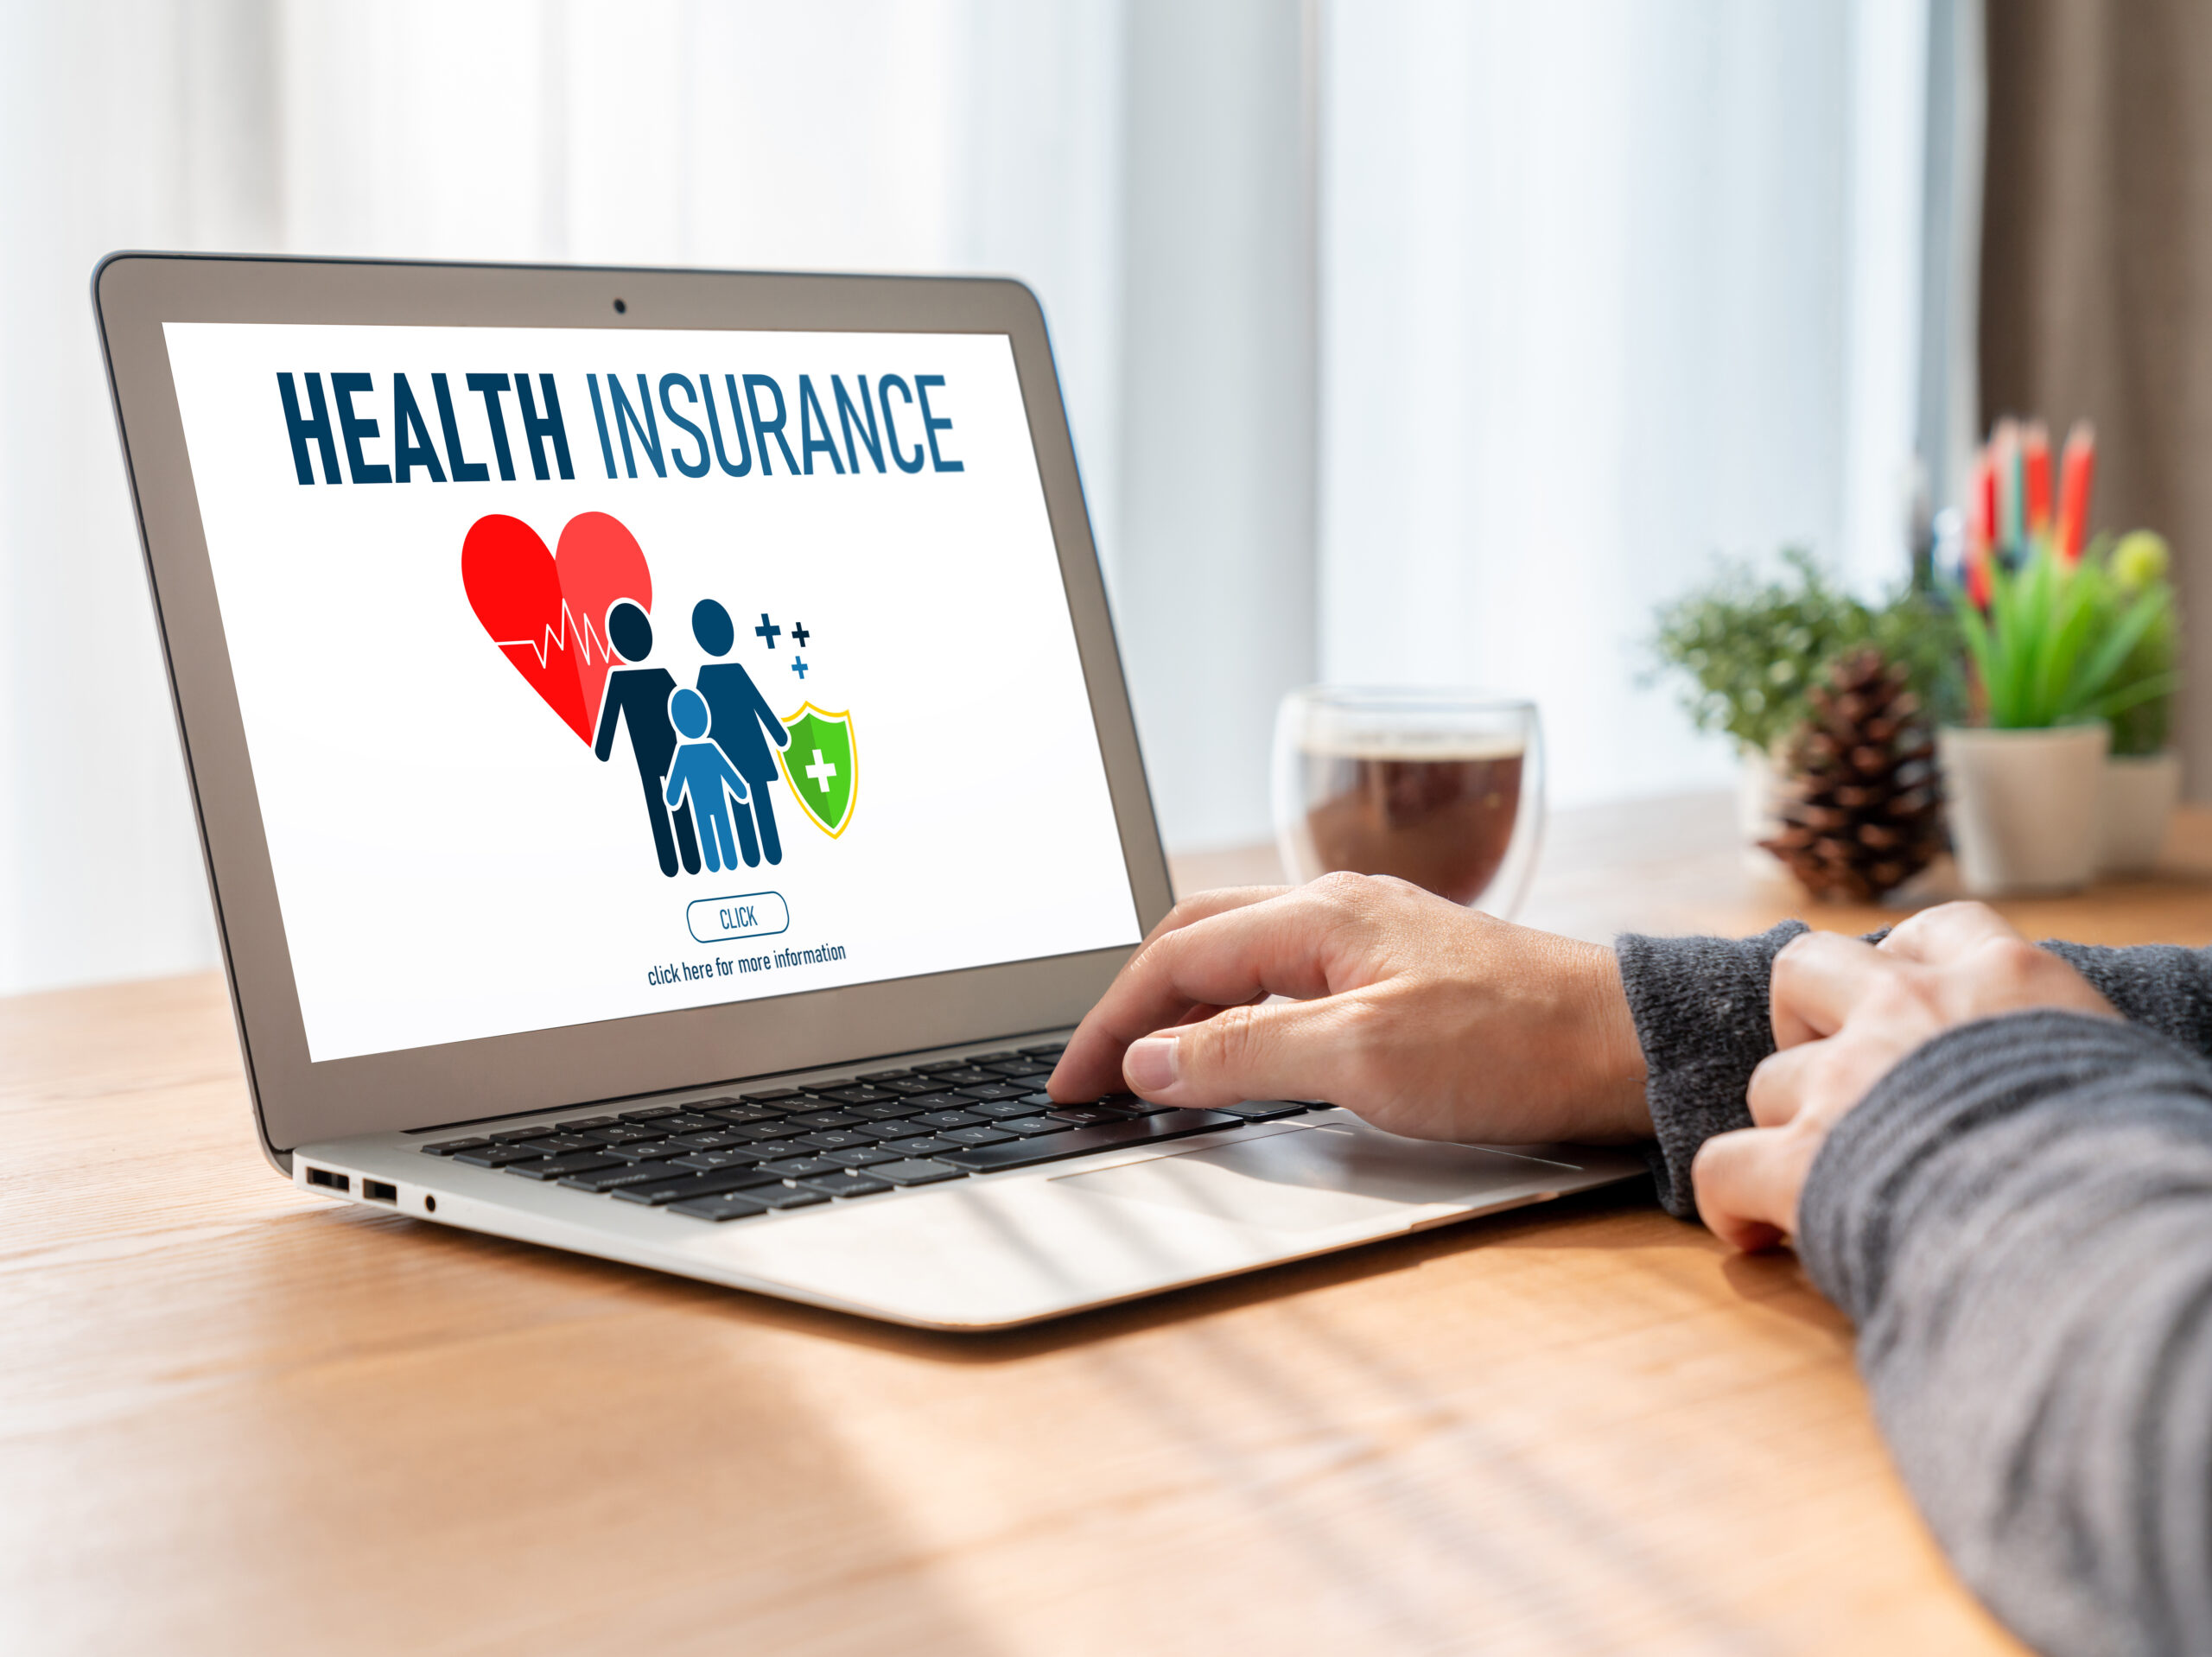 Insurance brokers say rogue agents are switching batches of customers to new plans without the customers' knowledge. The agents then collect monthly commissions on the Affordable Care Act plans.